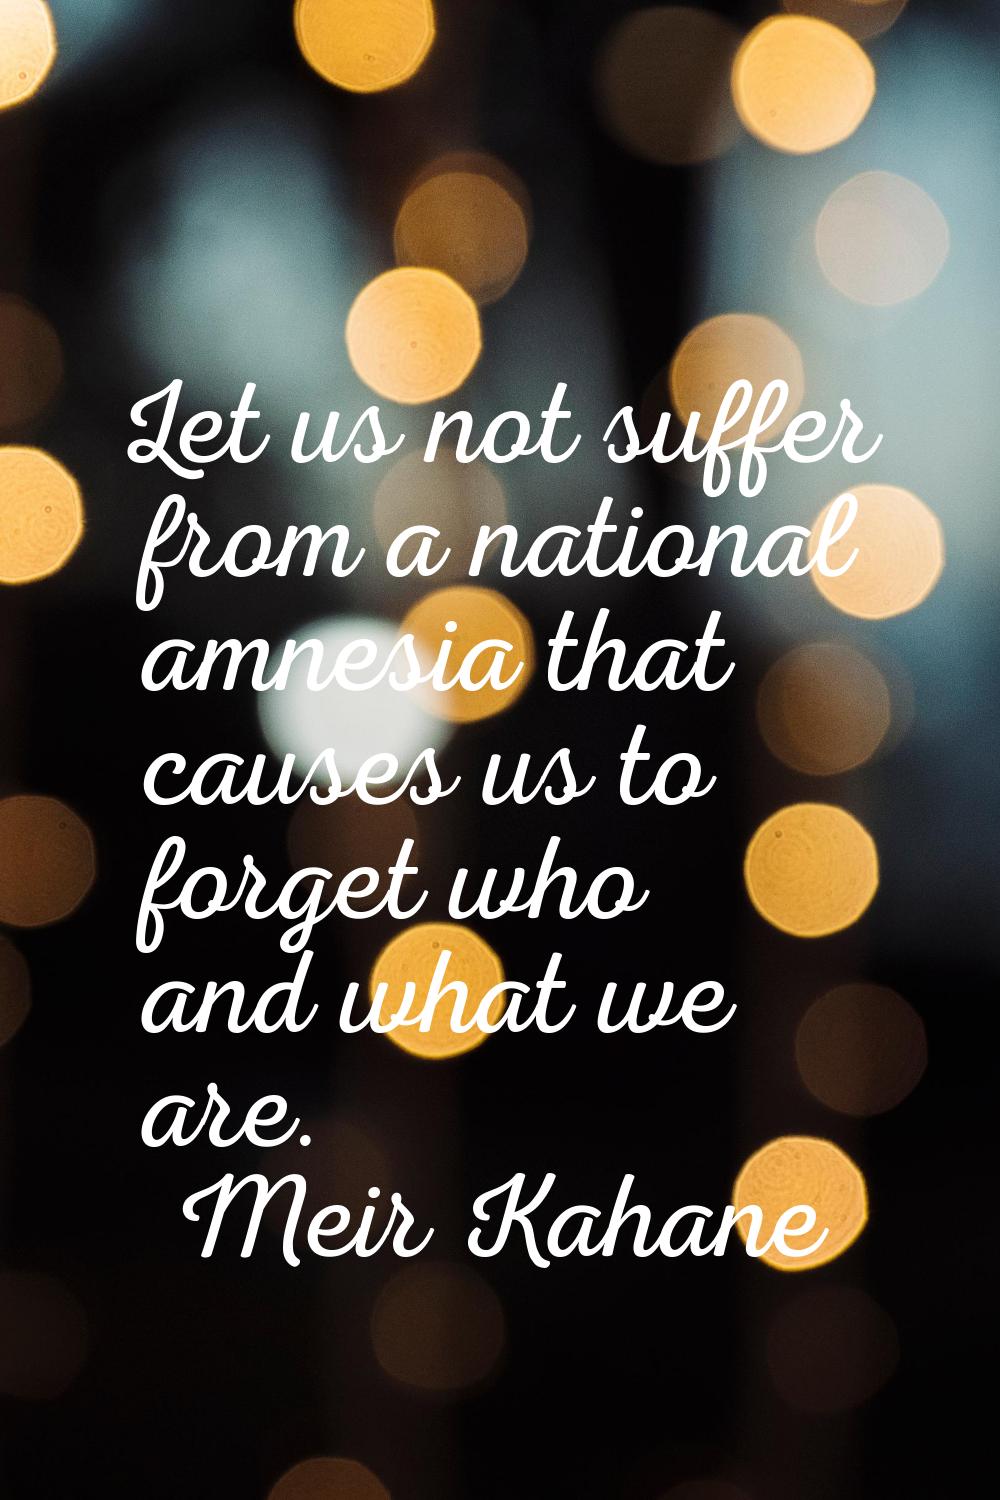 Let us not suffer from a national amnesia that causes us to forget who and what we are.